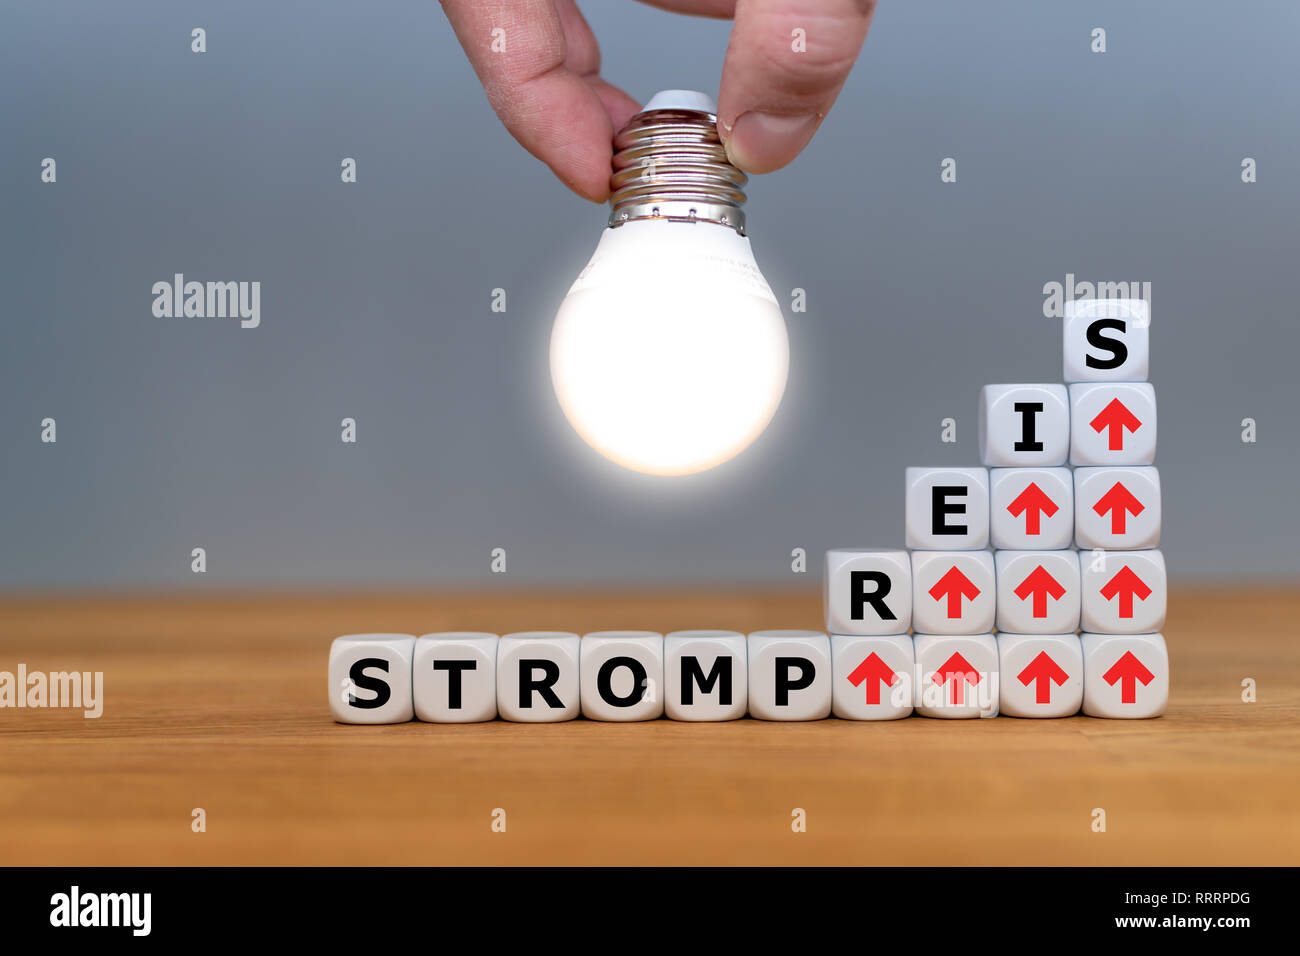 Symbol for increasing electricity rates. Dice form the German word 'Strompreis' ('electricity rate' in English) in front of a light bulb. Stock Photo